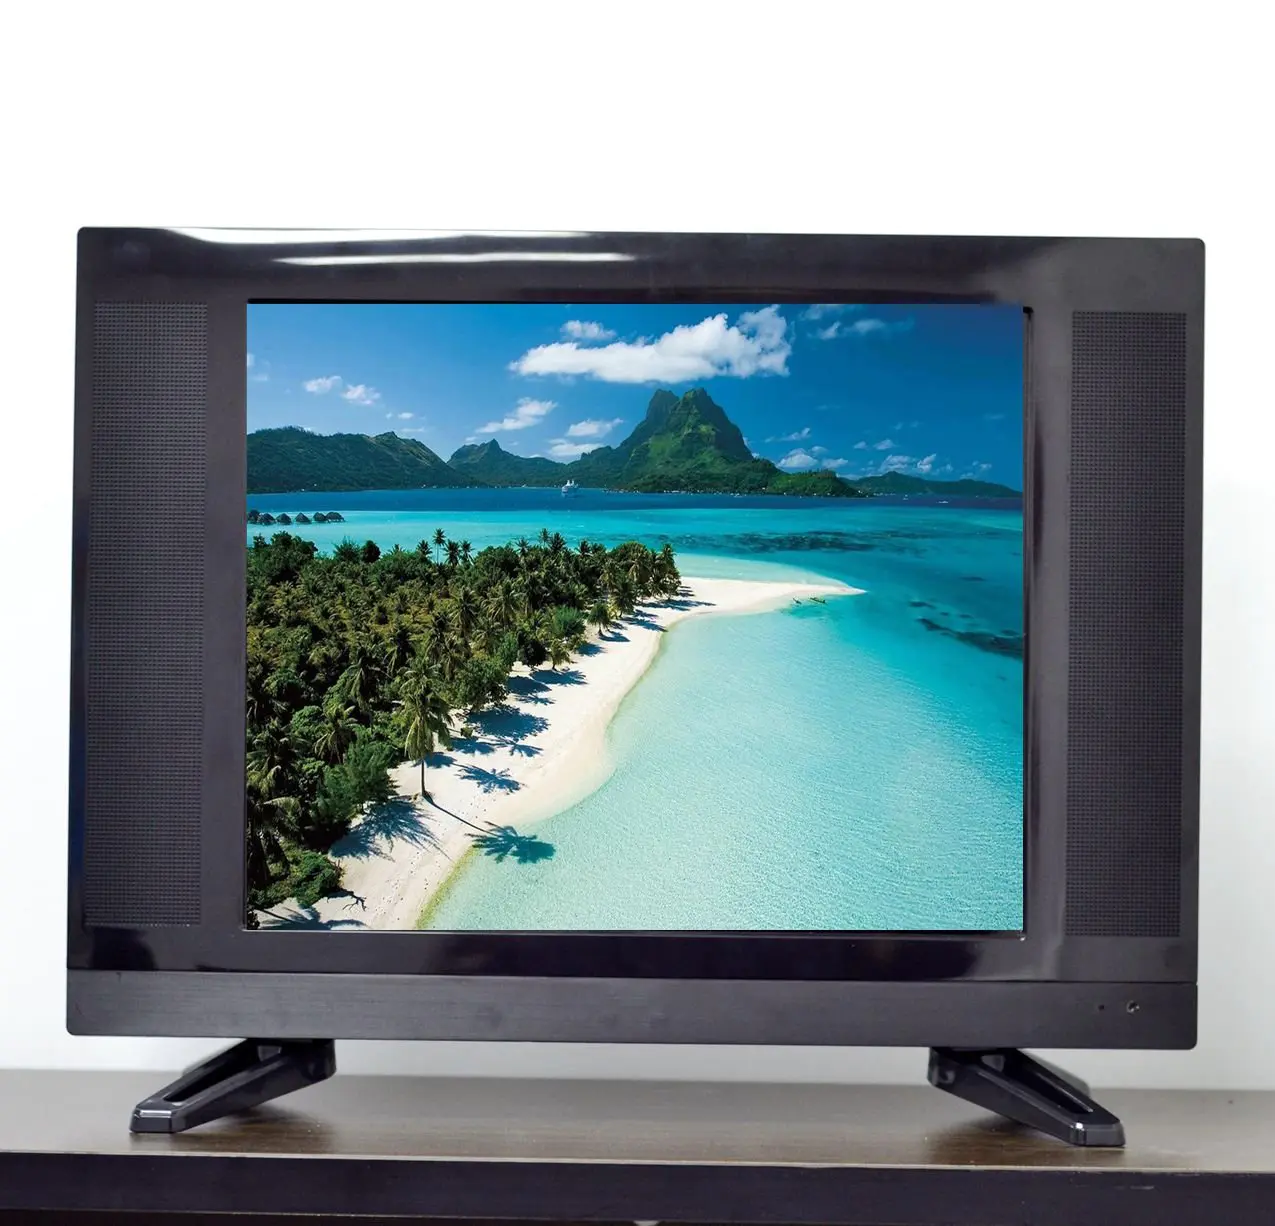 Xinyao LCD universal 15 inch lcd tv popular for lcd screen